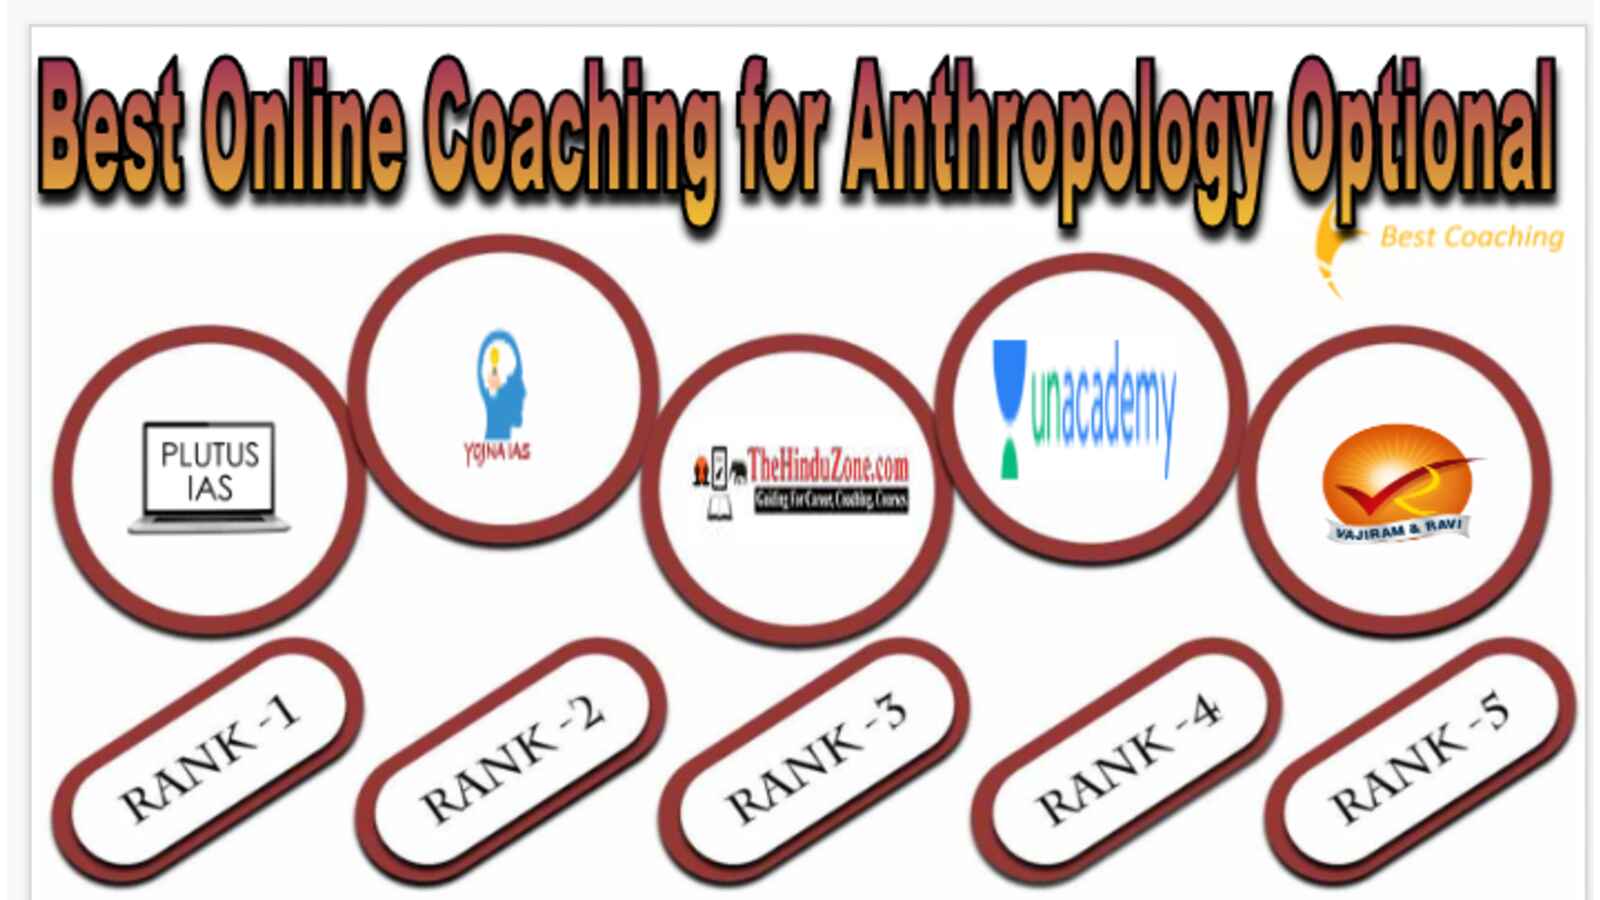 Best Online Coaching for Anthropology Optional